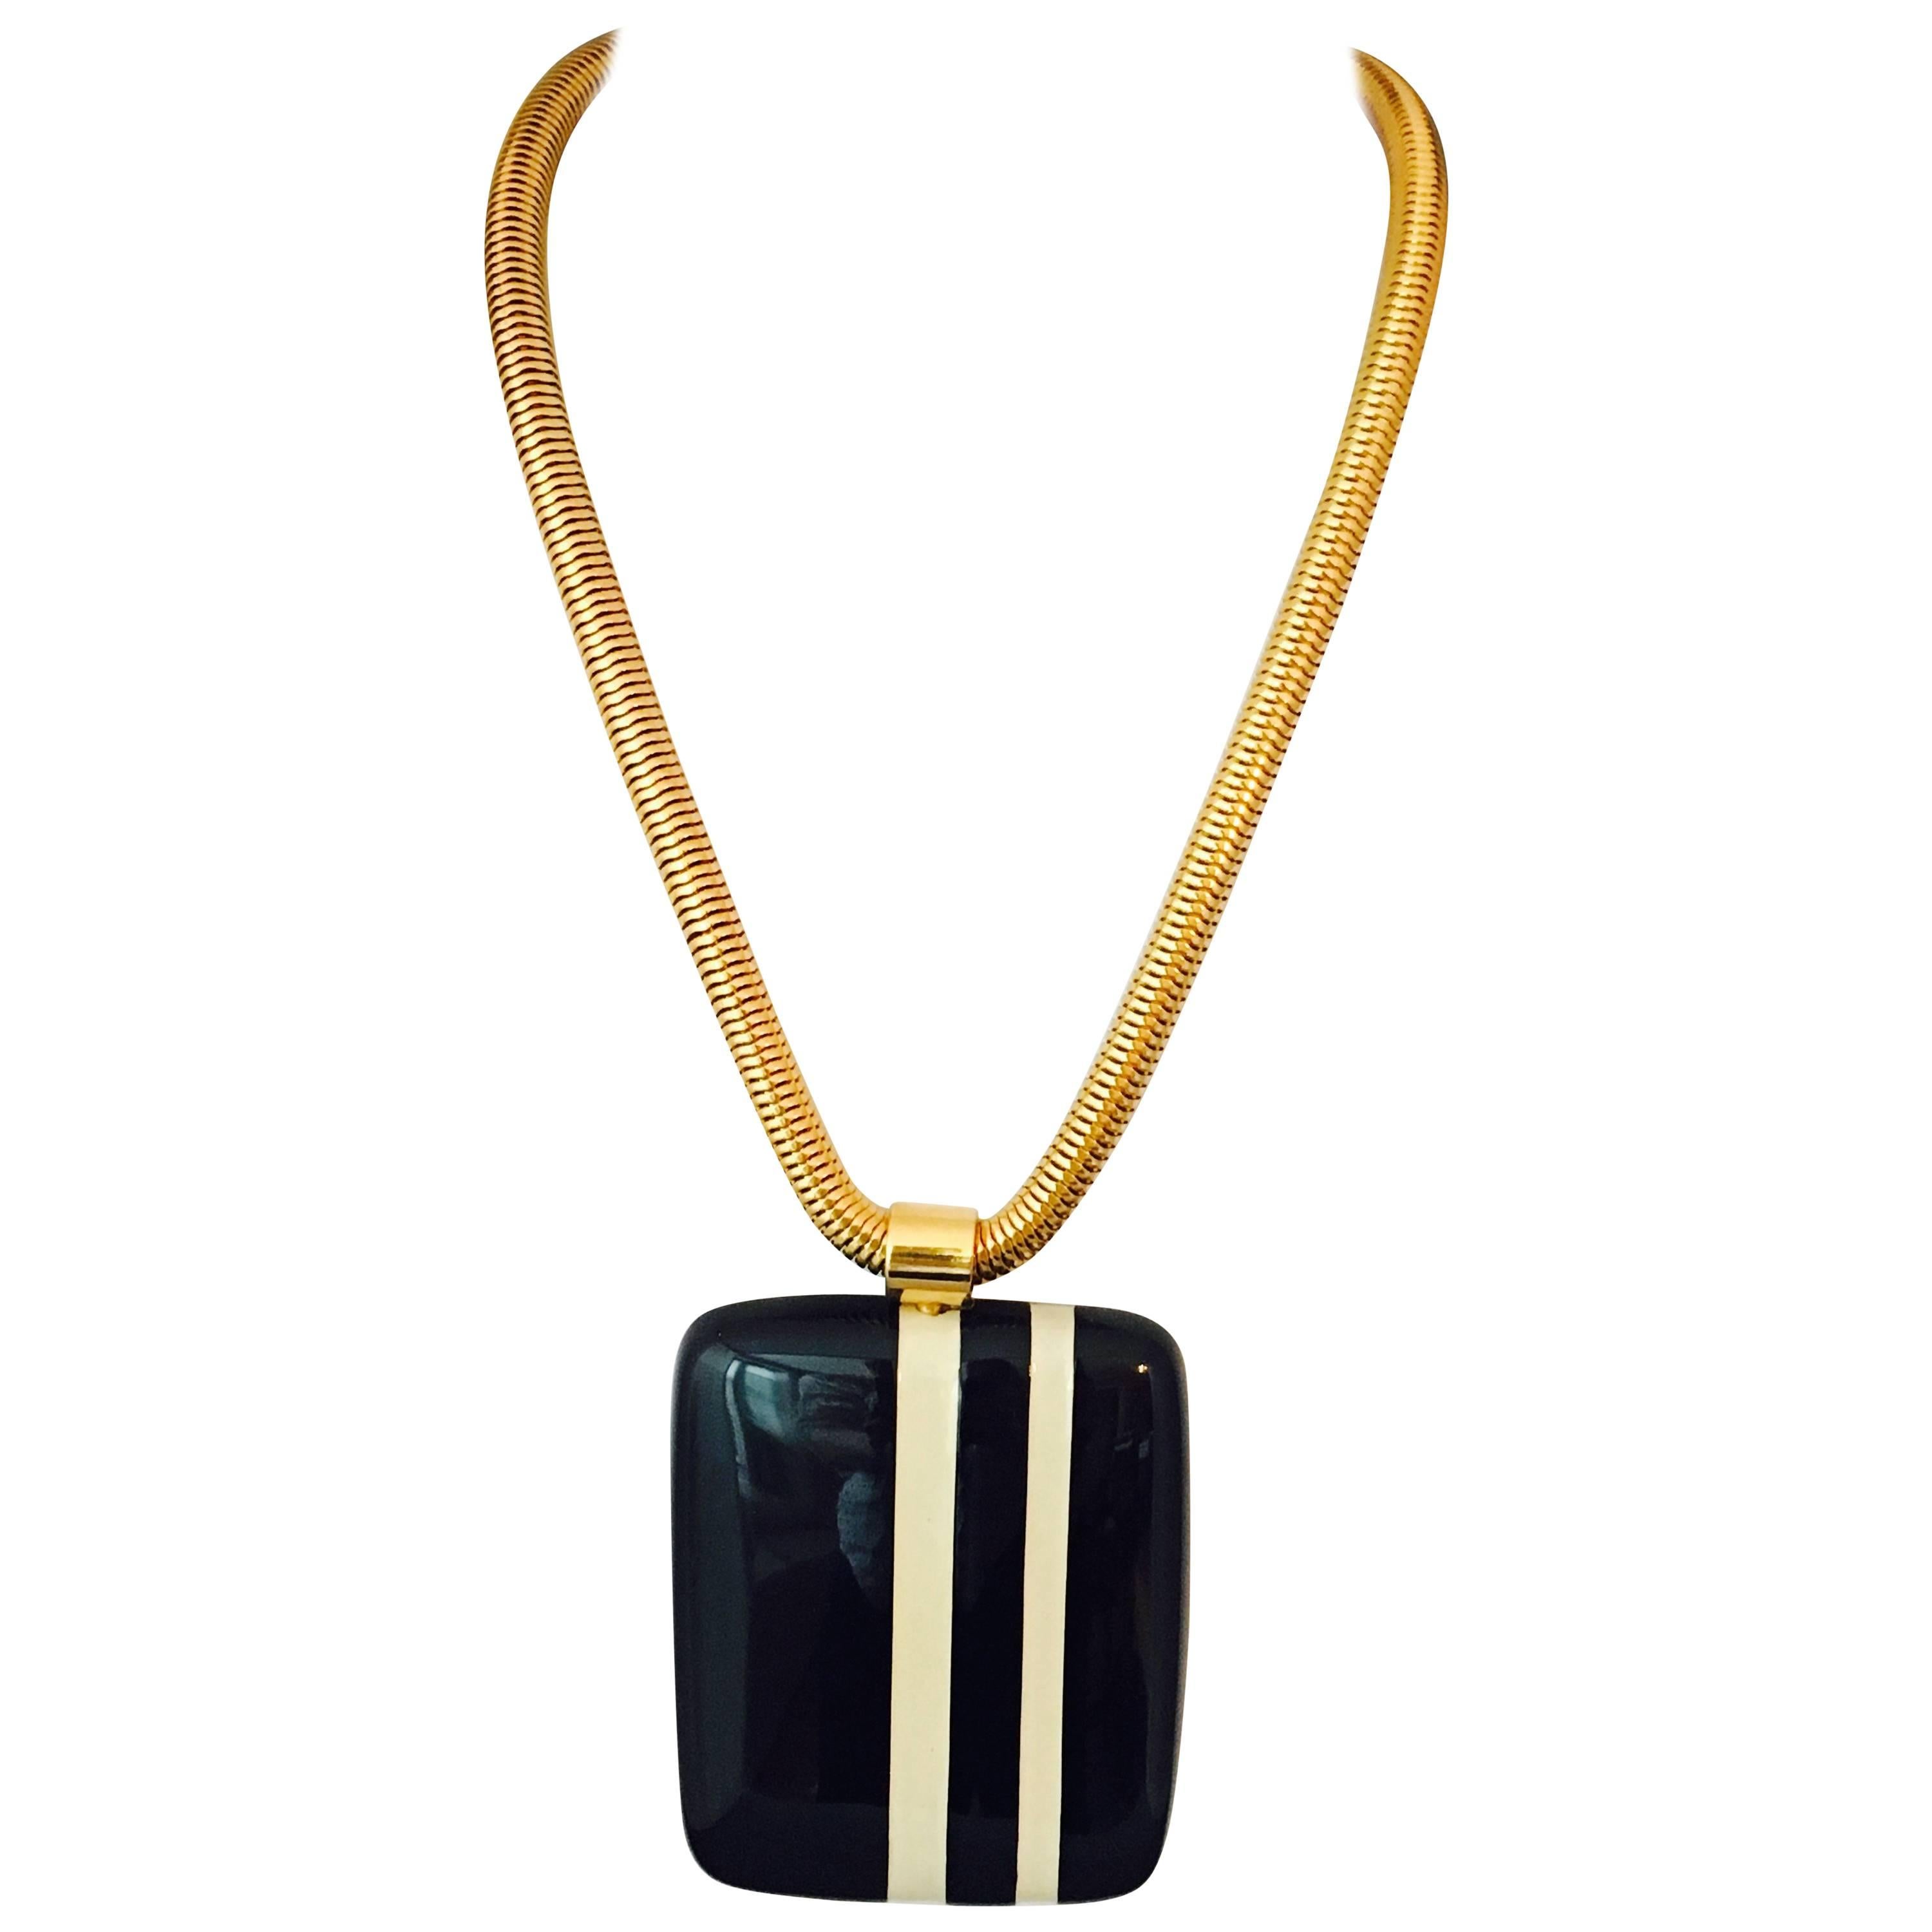 This is a fabulous 1970s Lanvin navy and white striped pendant necklace. The large pendant is made out of a substantial resin and hangs from an 18 1/2 inch long snake chain. The pendant measures 3 inches long x 2 3/8 inches wide x 3/8 inches thick.